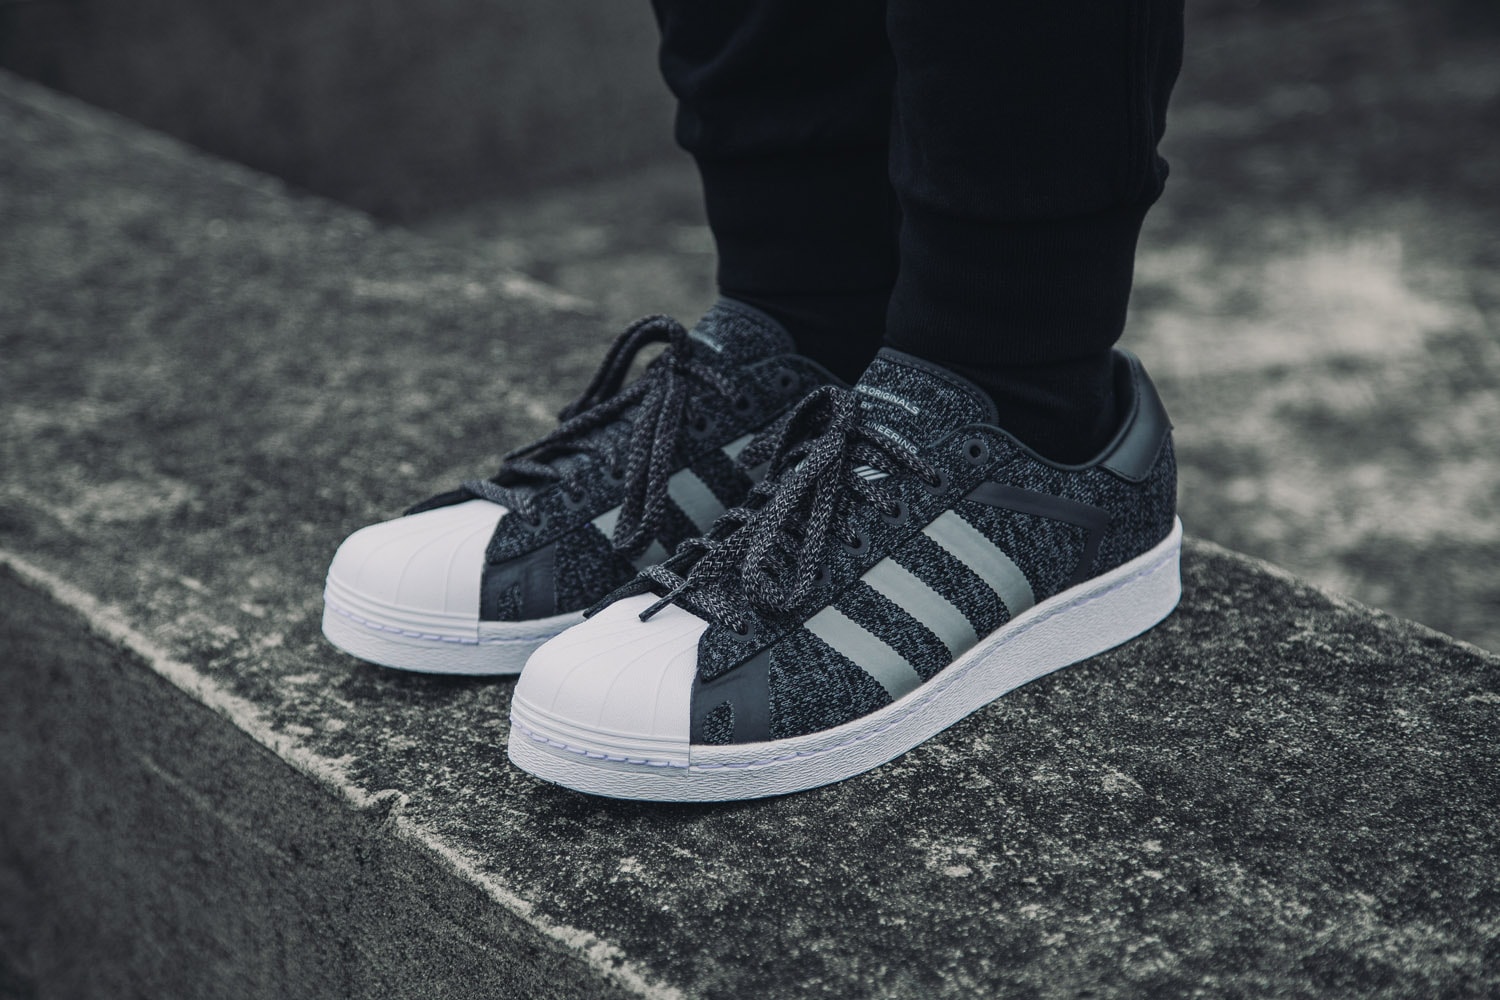 adidas Originals White Mountaineering Superstar Shoes 2018 January Drop Release date HBX collaboration primeknit